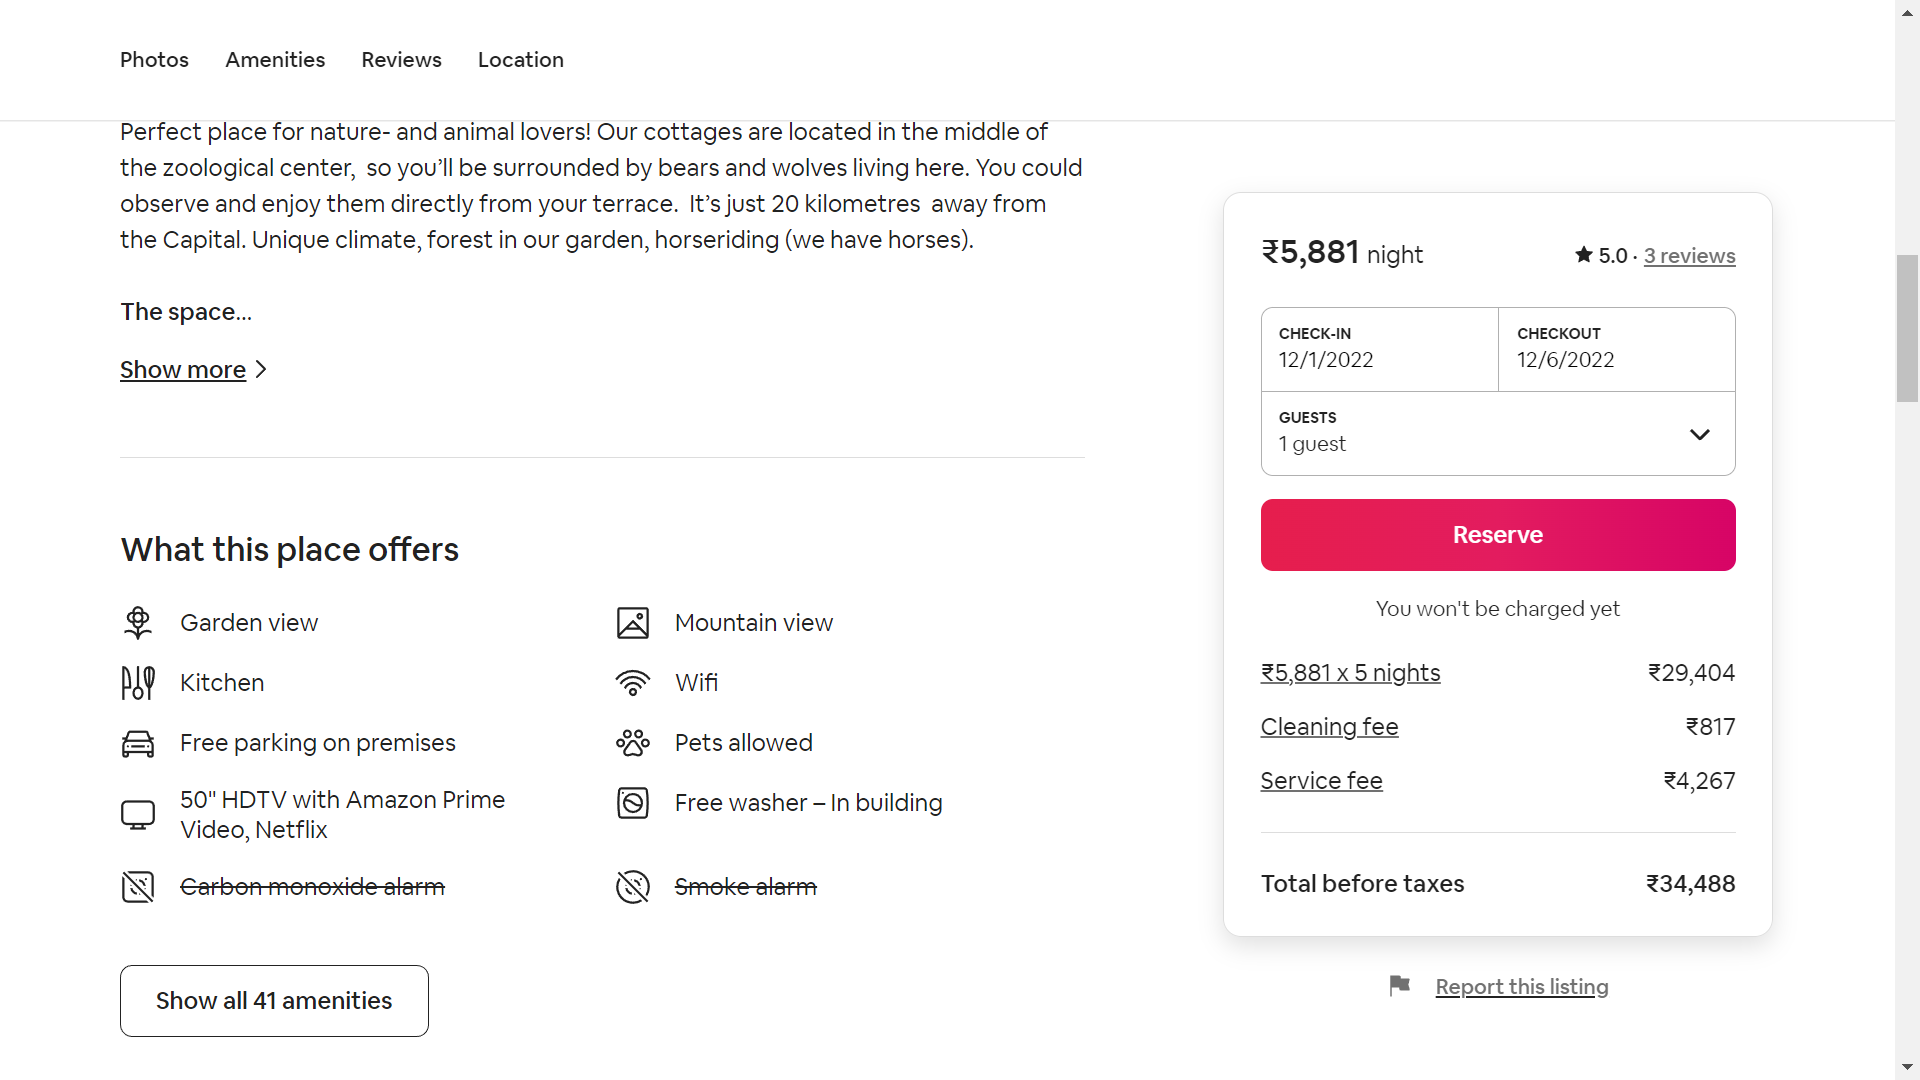 Screenshot of a random Airbnb booking page showcasing amenities listed and price breakdown.